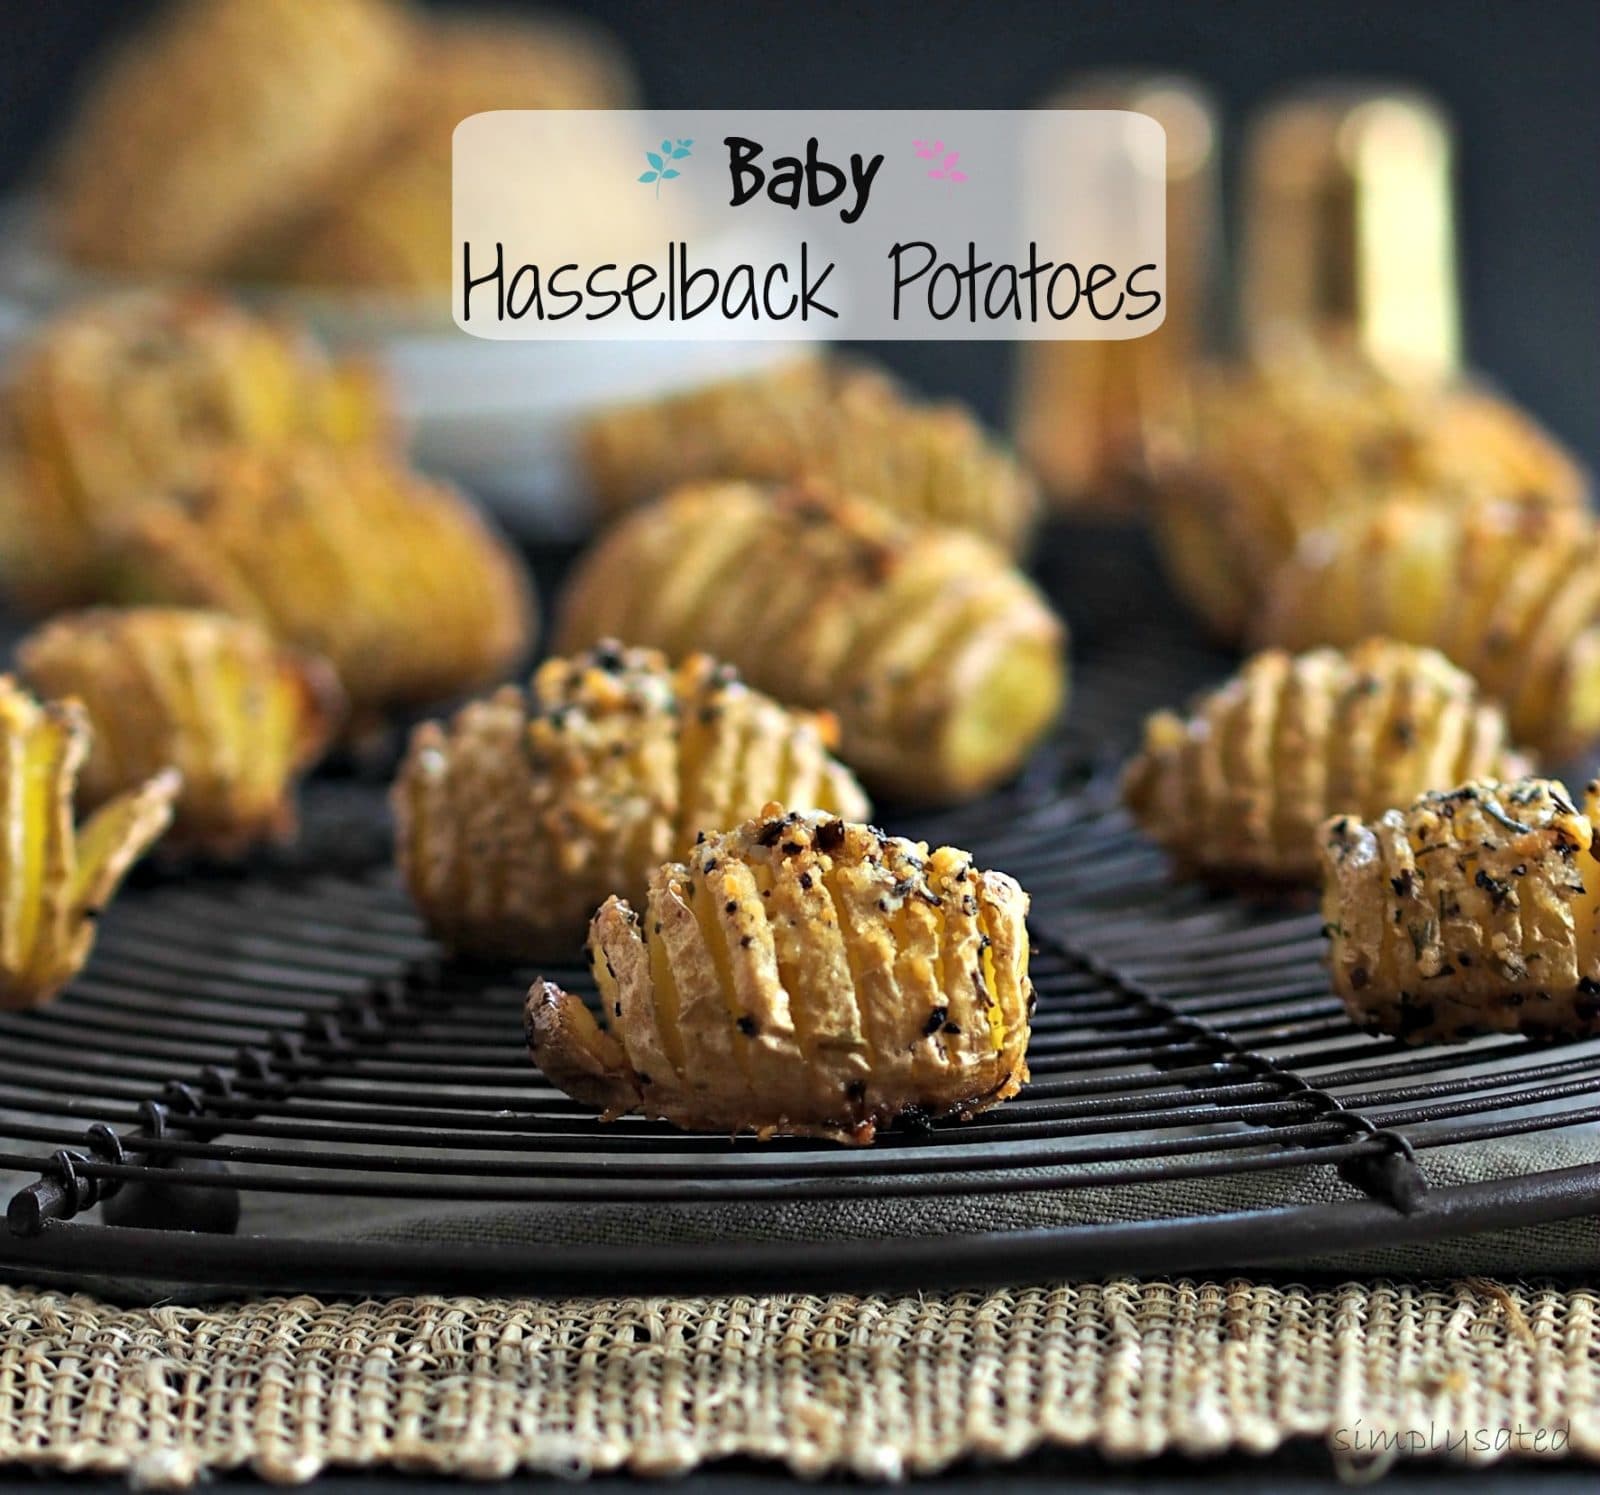 Baby Hasselback Potatoes - the perfect side for a family meal or formal dinner party. Accordion-sliced baby gold potatoes fan open while baking. Simply Sated